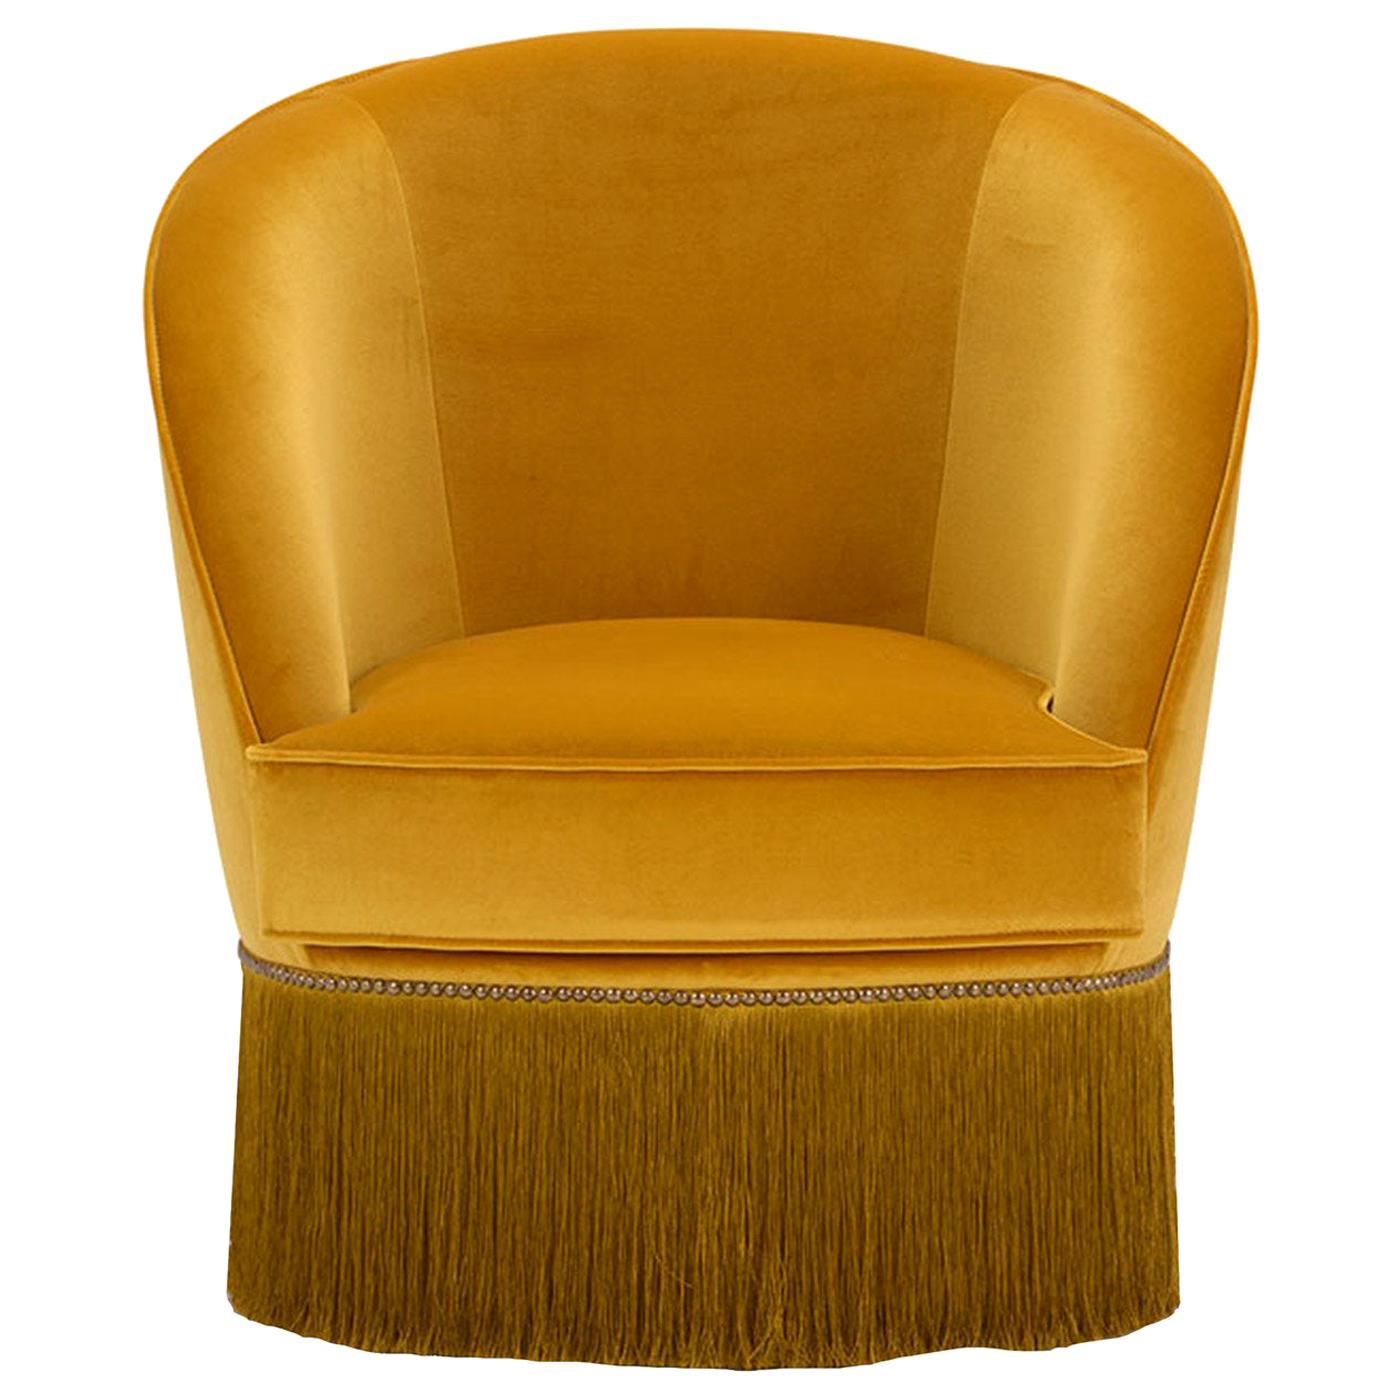 Dione Small Ocher Armchair with Fringes